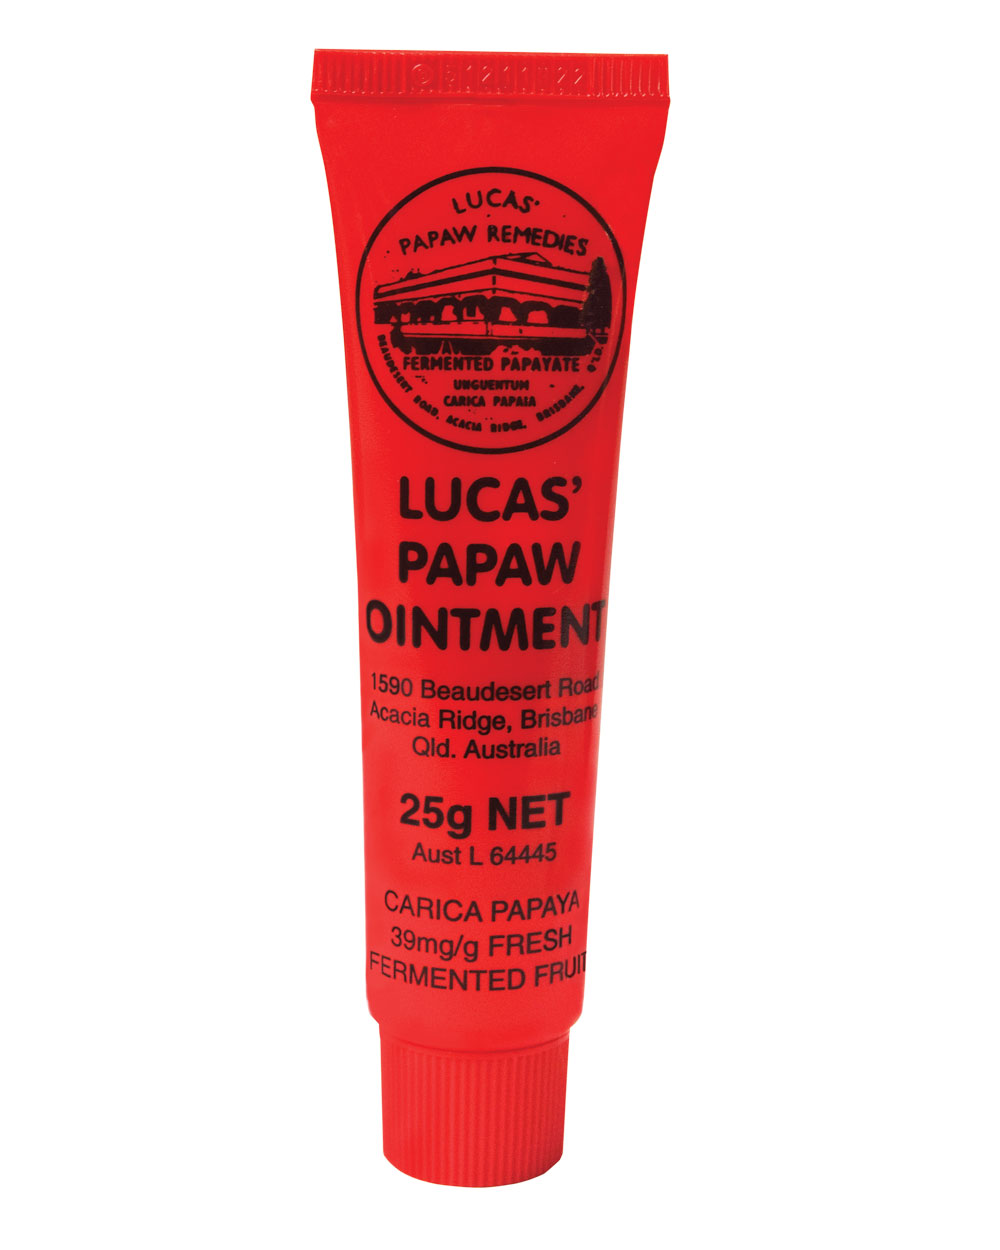 Pucker up Lucas’ Papaw Ointment, $12.20